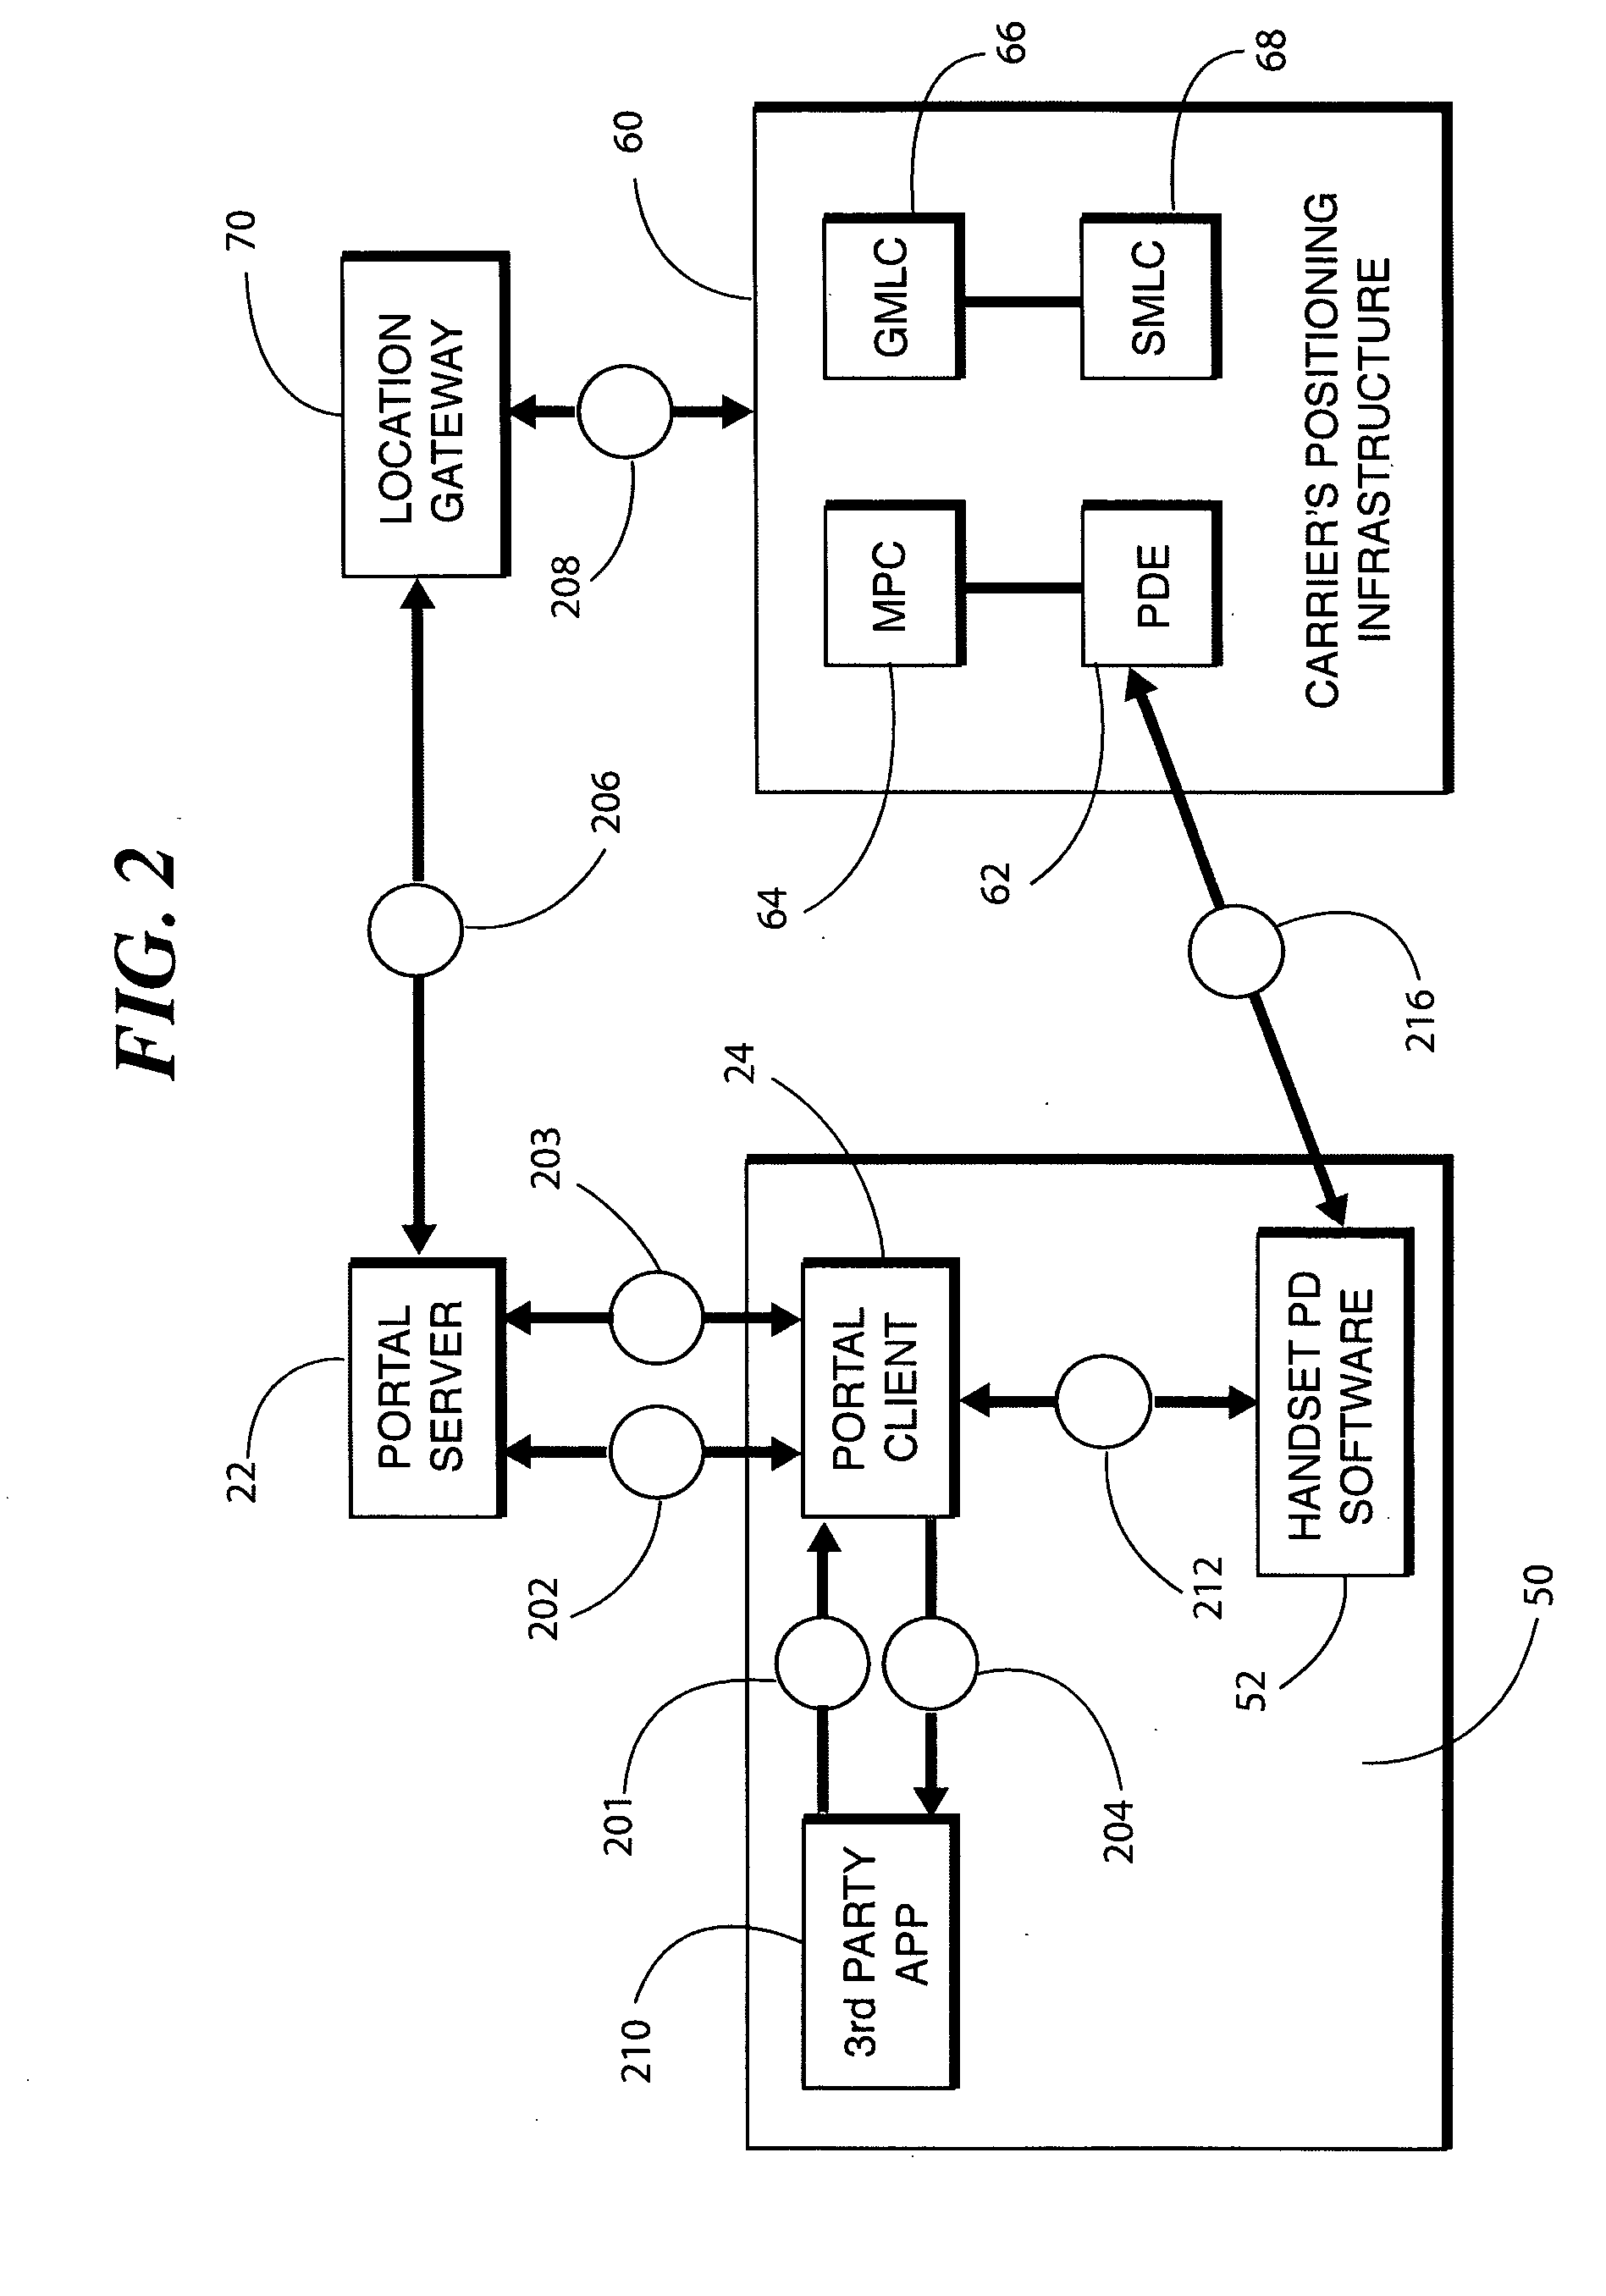 Method and apparatus for developing location-based applications utilizing a location-based portal